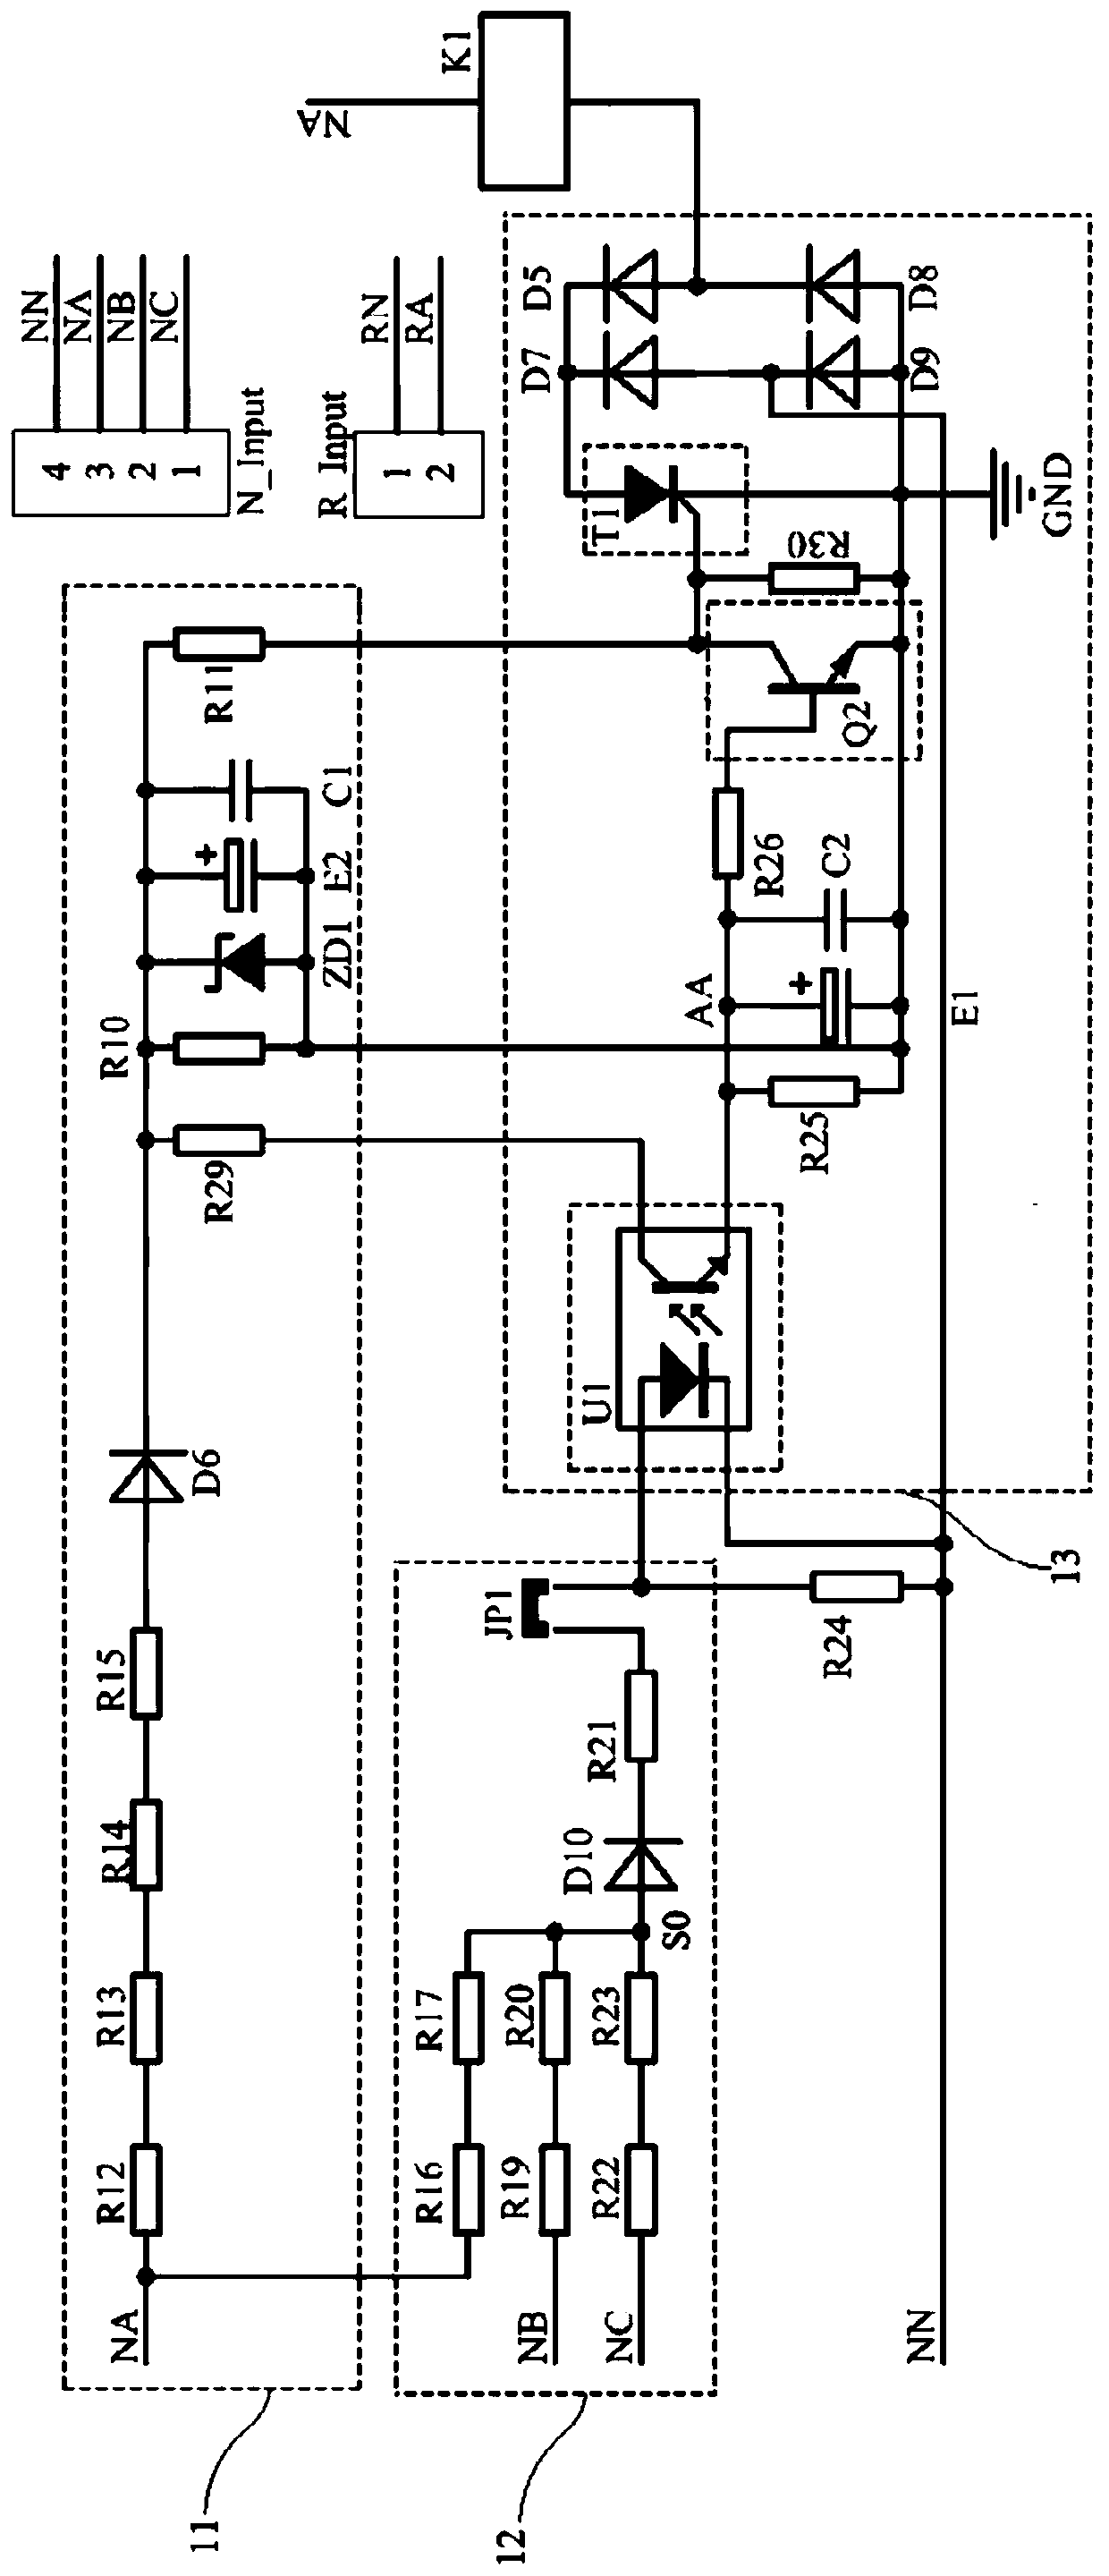 Simple PC-level dual-power change-over switch control circuit